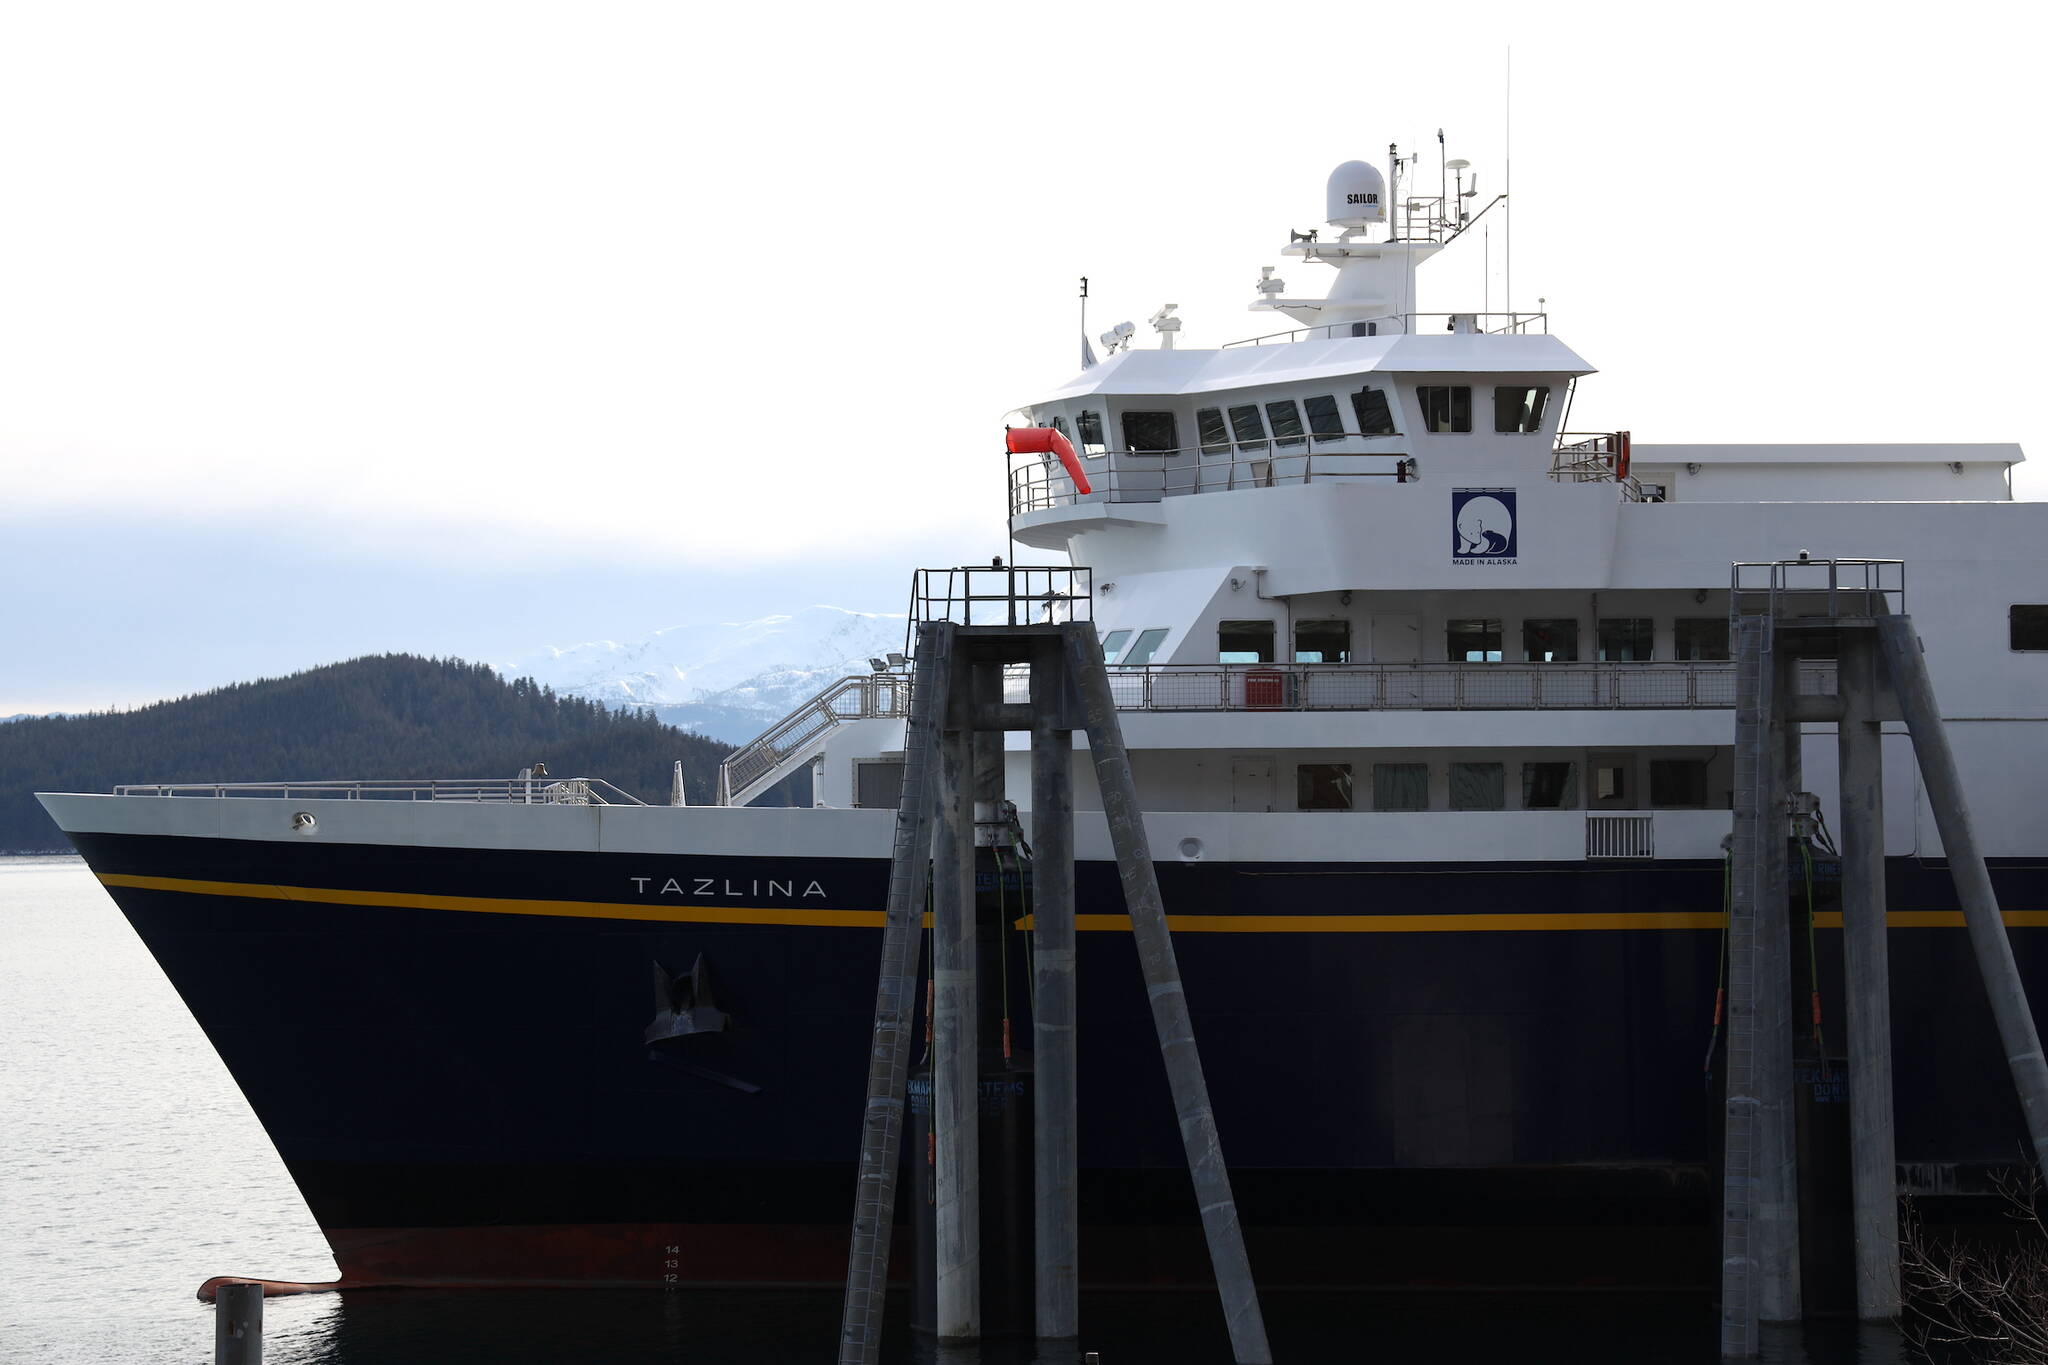 The Tazlina berths at the Auke Bay Terminal in March. The Alaska Marine Highway System’s proposed winter schedule is now available for public review, the Alaska Department of Transportation and Public Facilities announced Thursday afternoon. (Clarise Larson / Juneau Empire File)